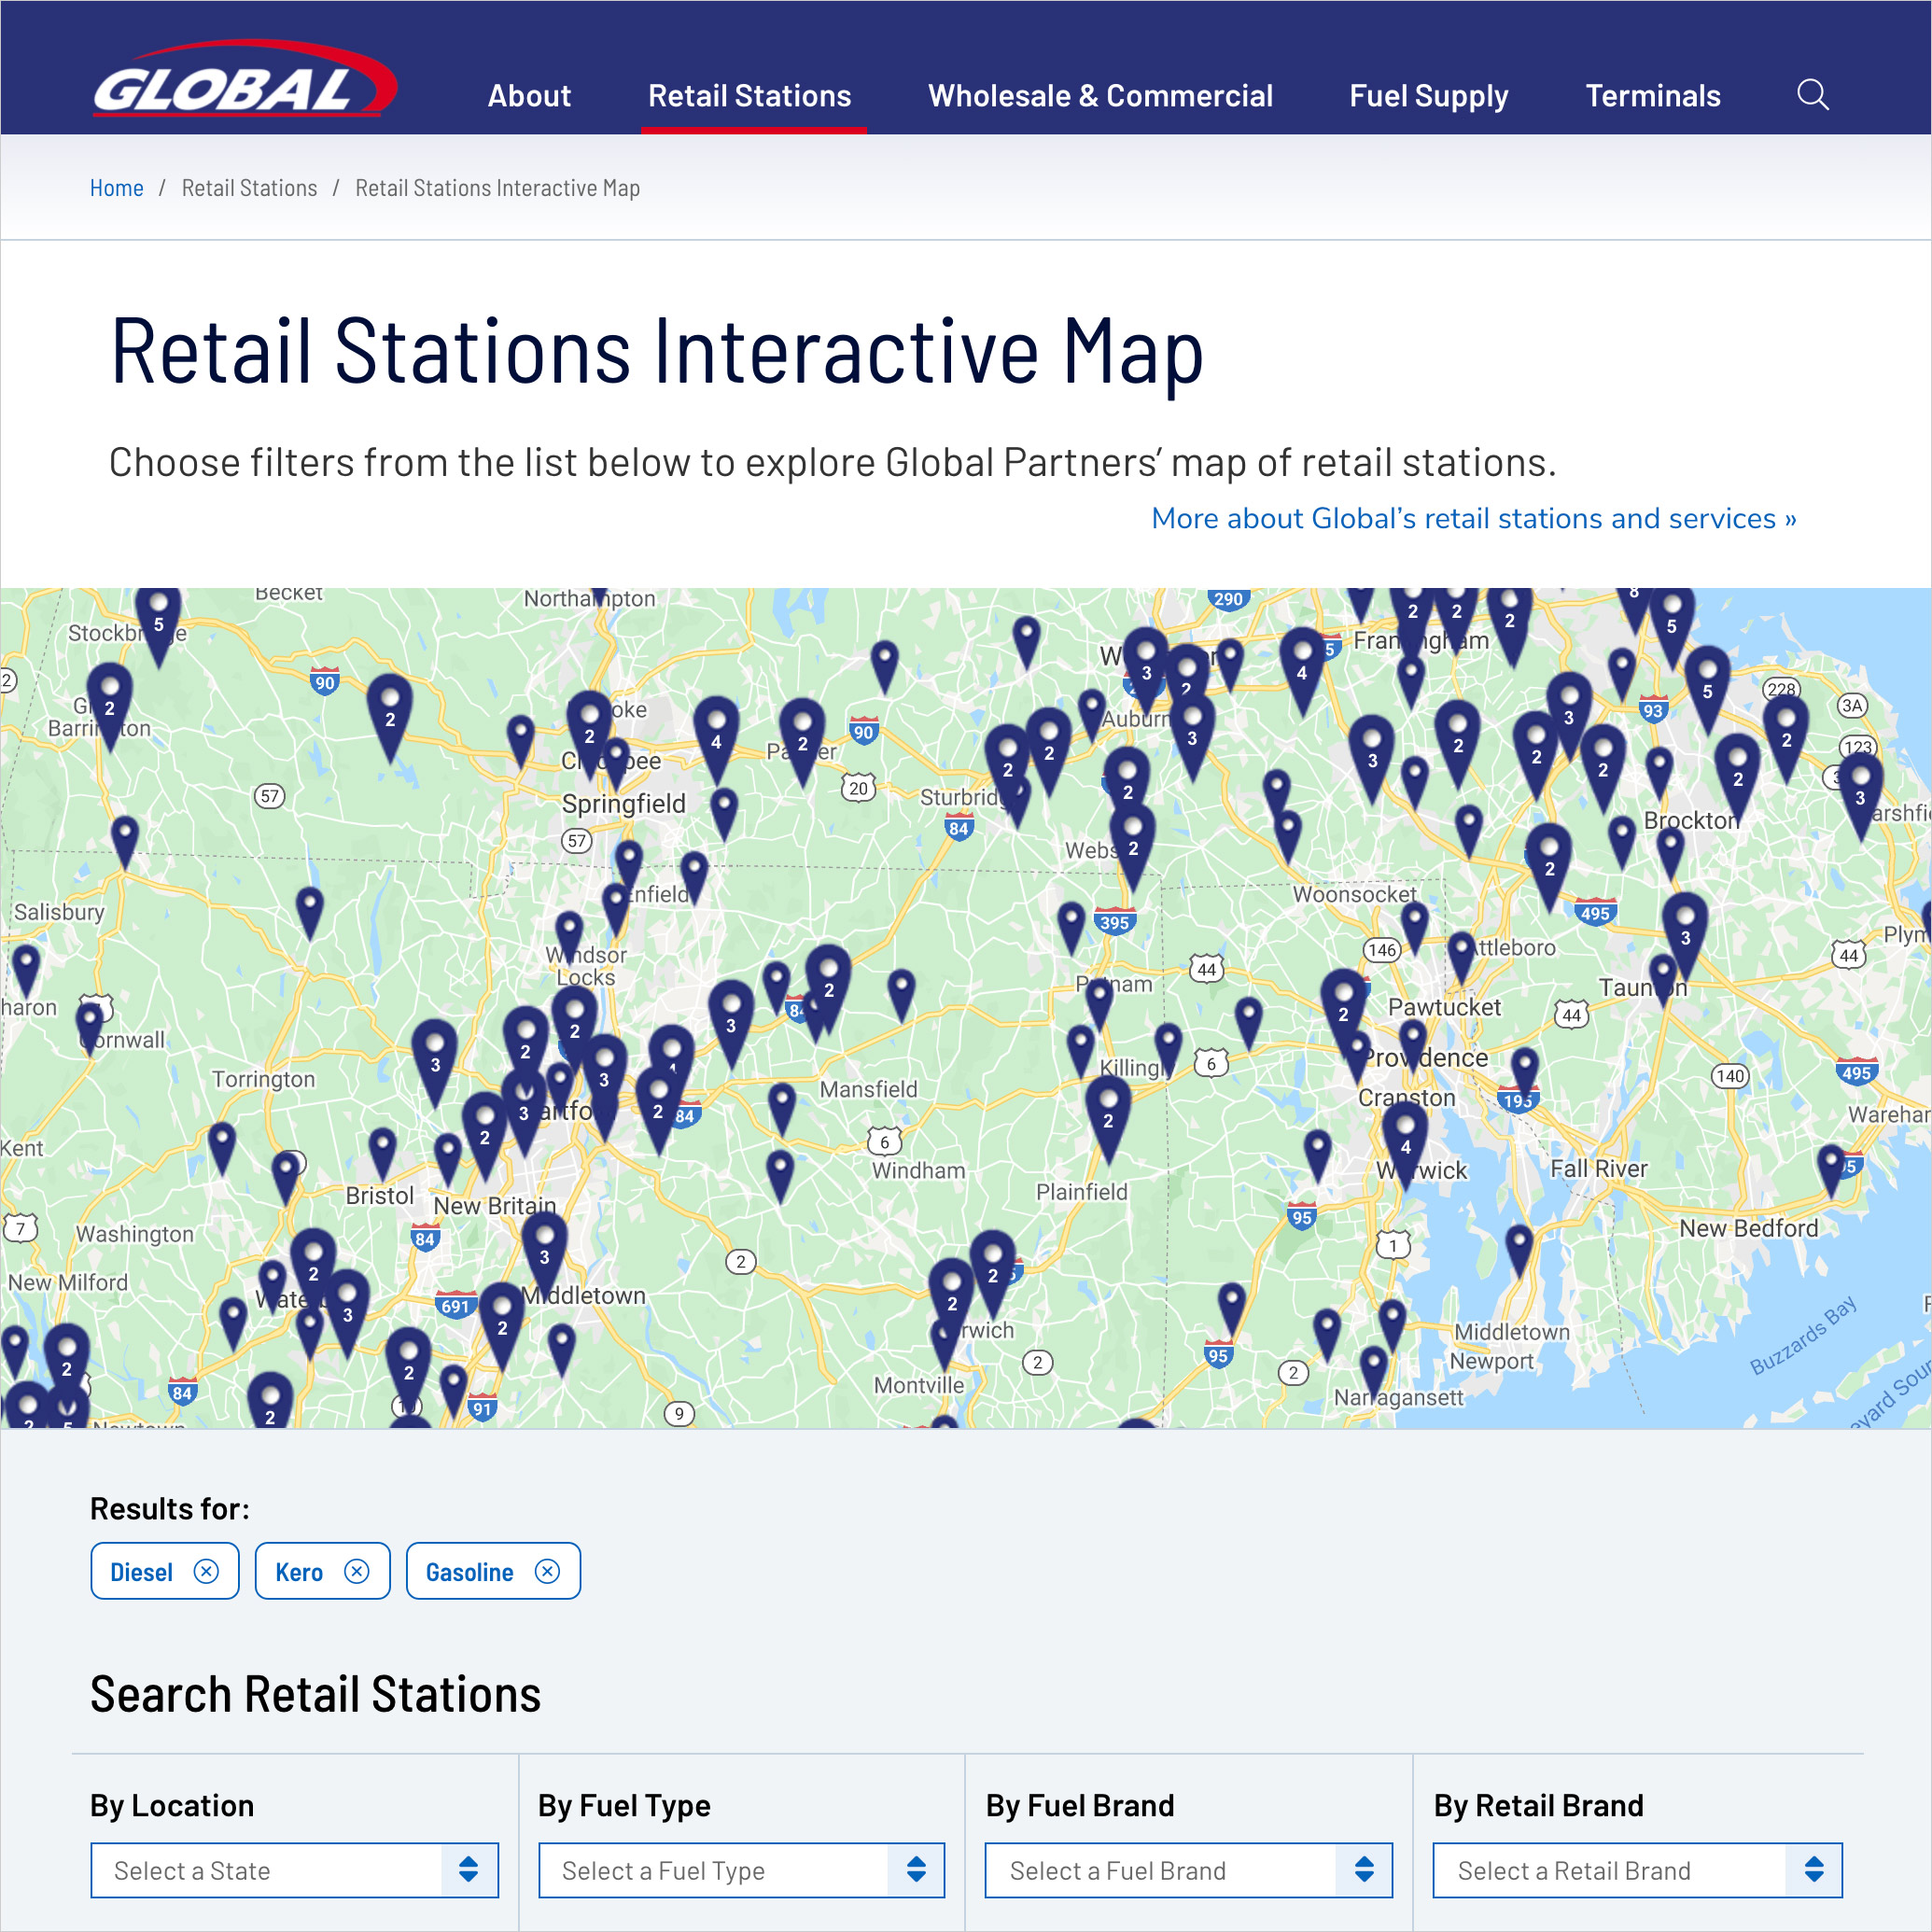 Interface design for Global partners' Interactive map of retail stations